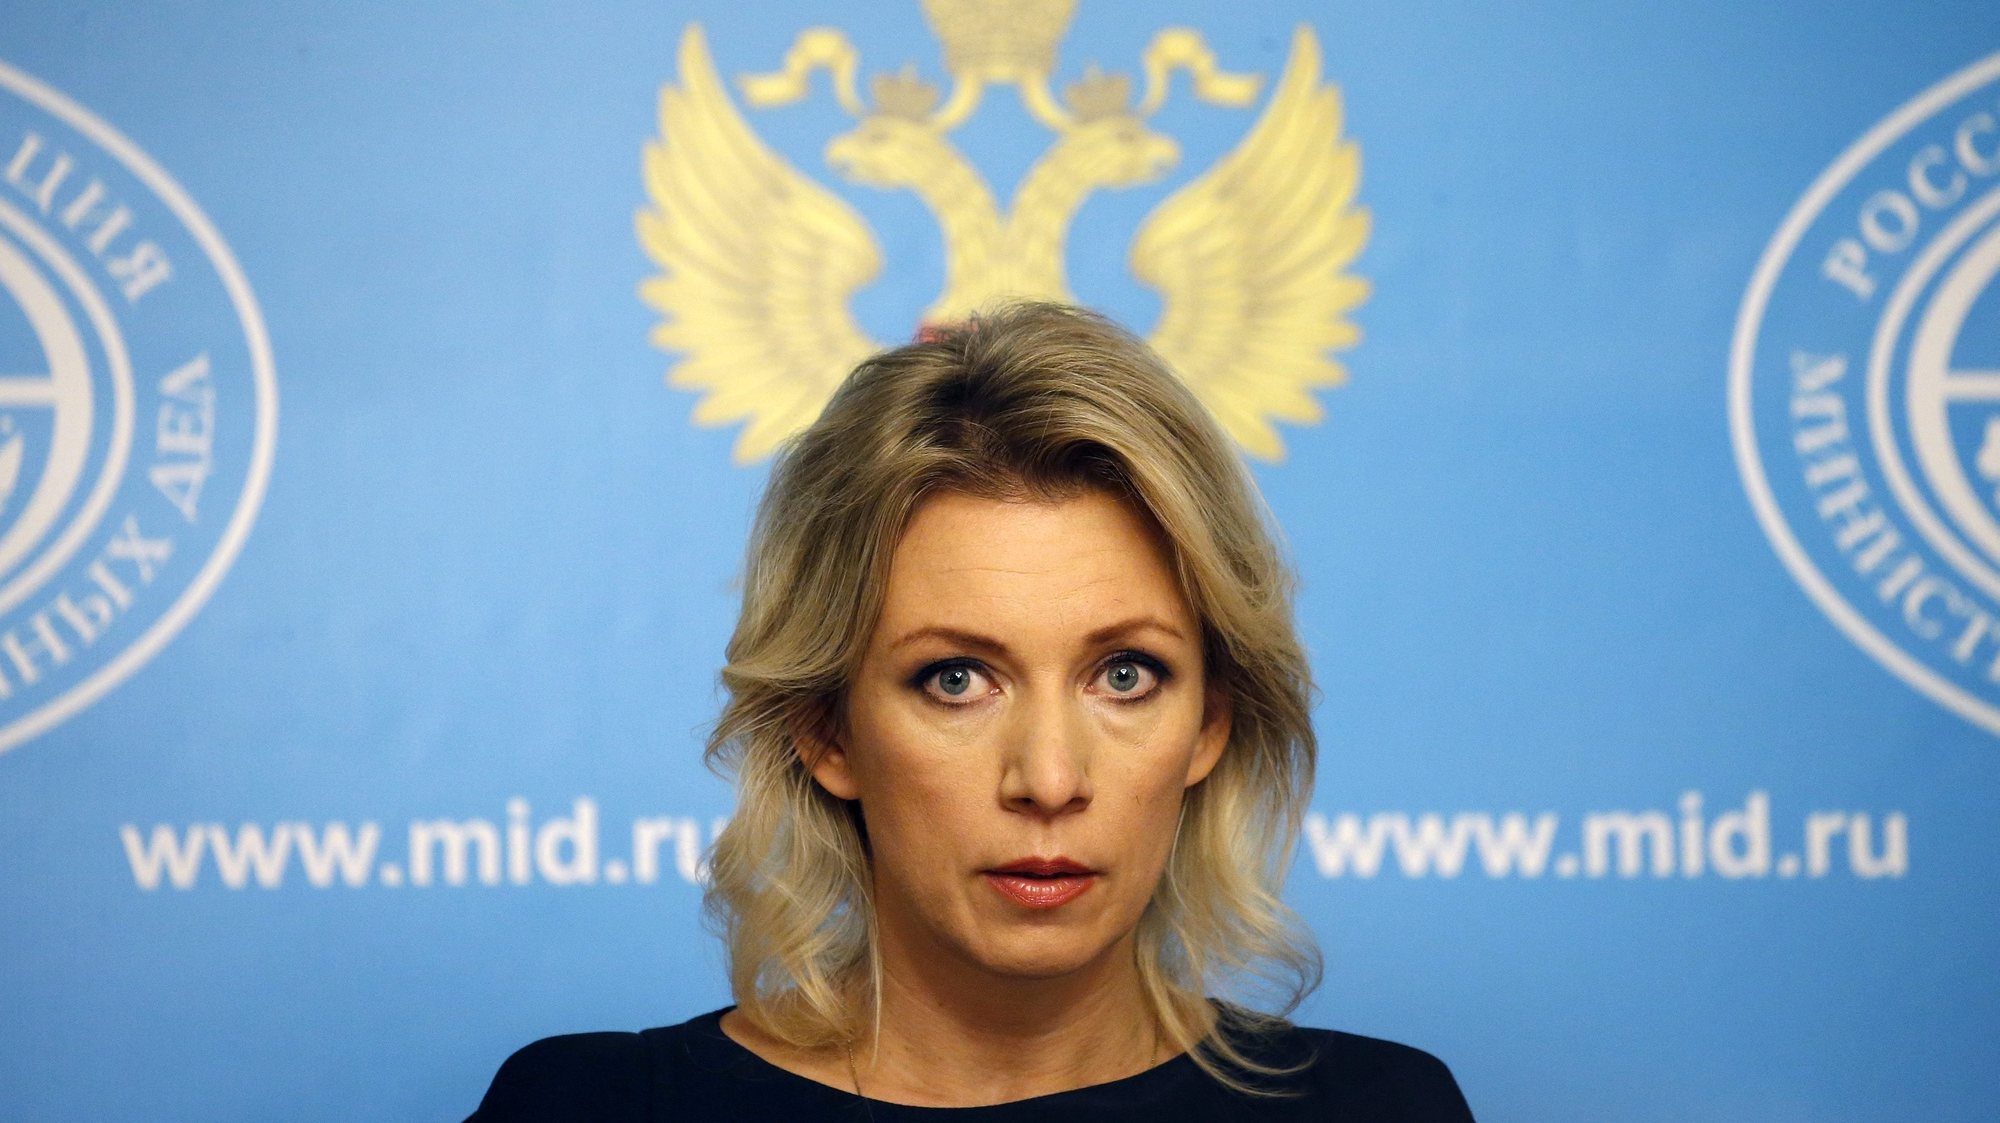 epa04965938 Russian Foreign Ministry spokesperson Maria Zakharova speaks during a special news briefing in Moscow, Russia, 06 October 2015. According to Maria Zakharova, Russia denies plans to carry out ground operation in Syria, and volunteers will not be encouraged by Russian officials to take part in the war.  EPA/MAXIM SHIPENKOV